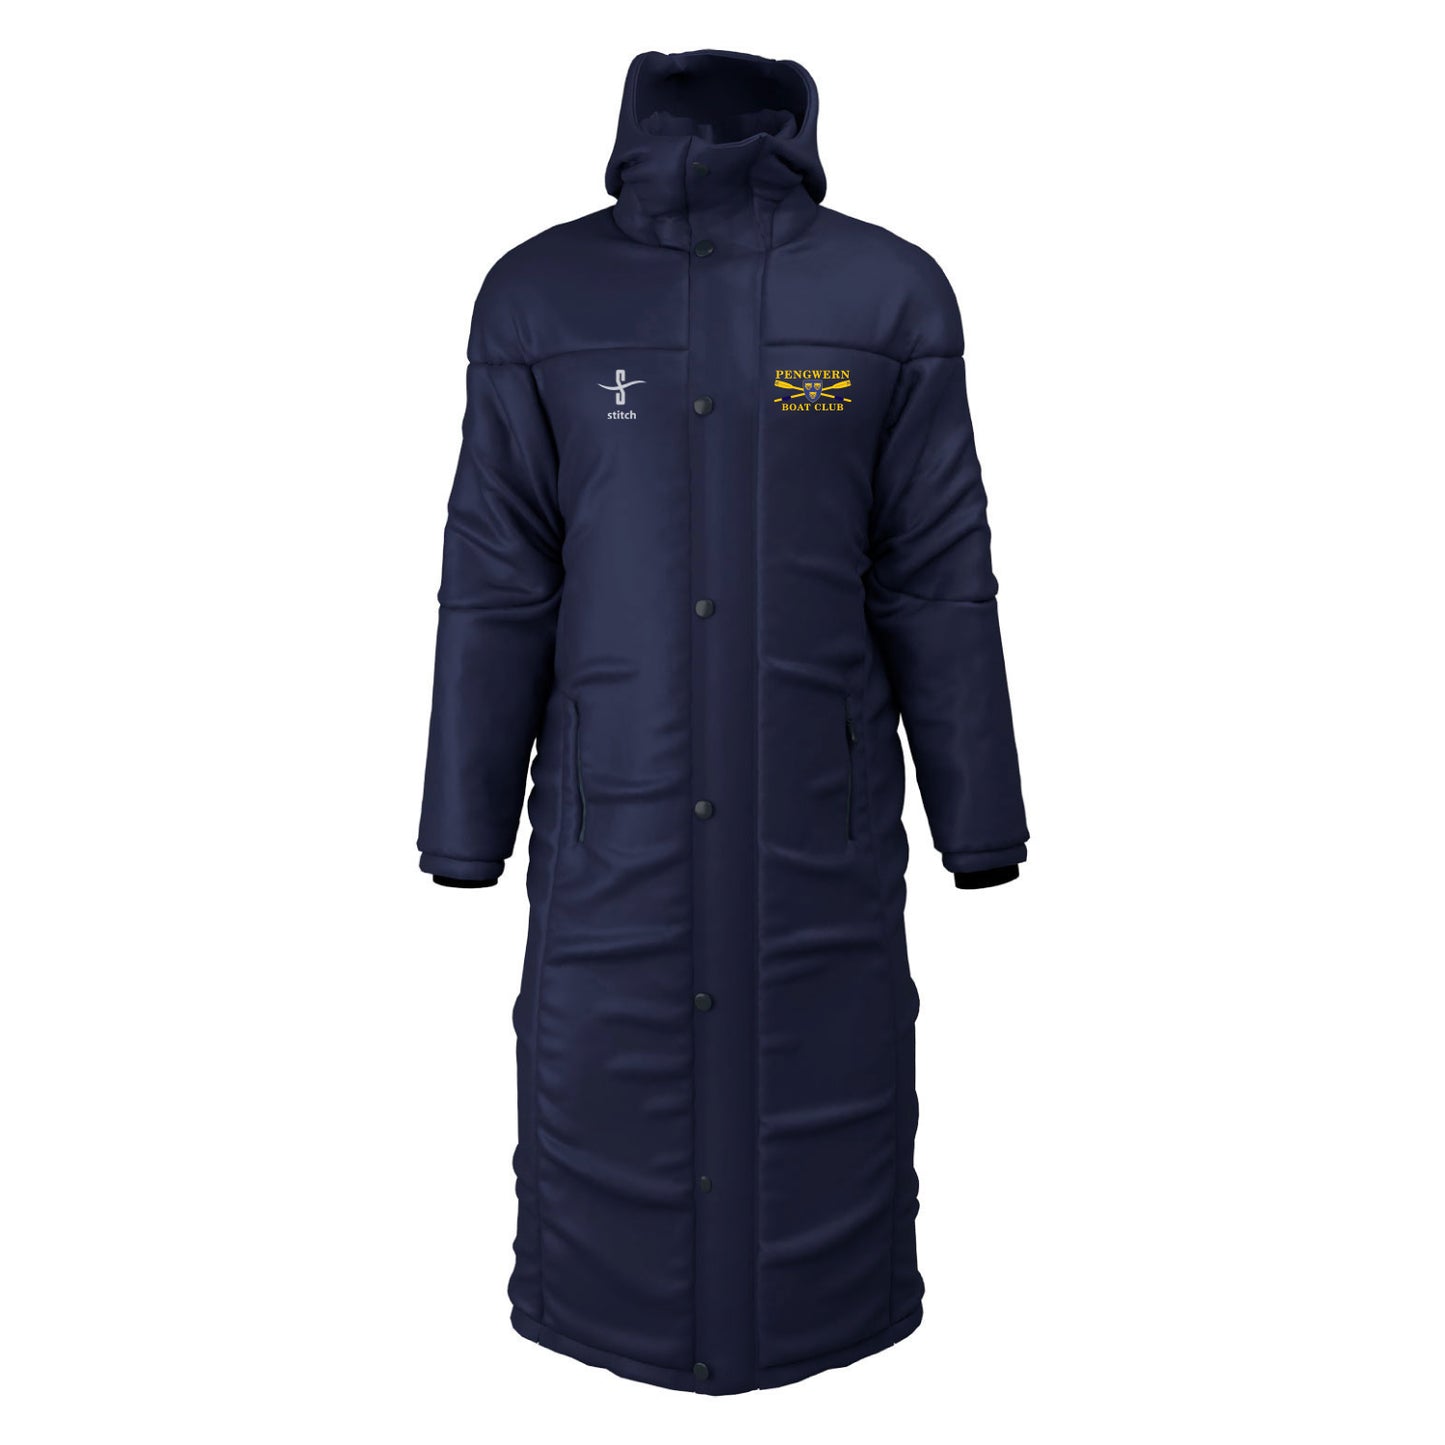 Pengwern Boat Club Contoured Thermal Sub Coat